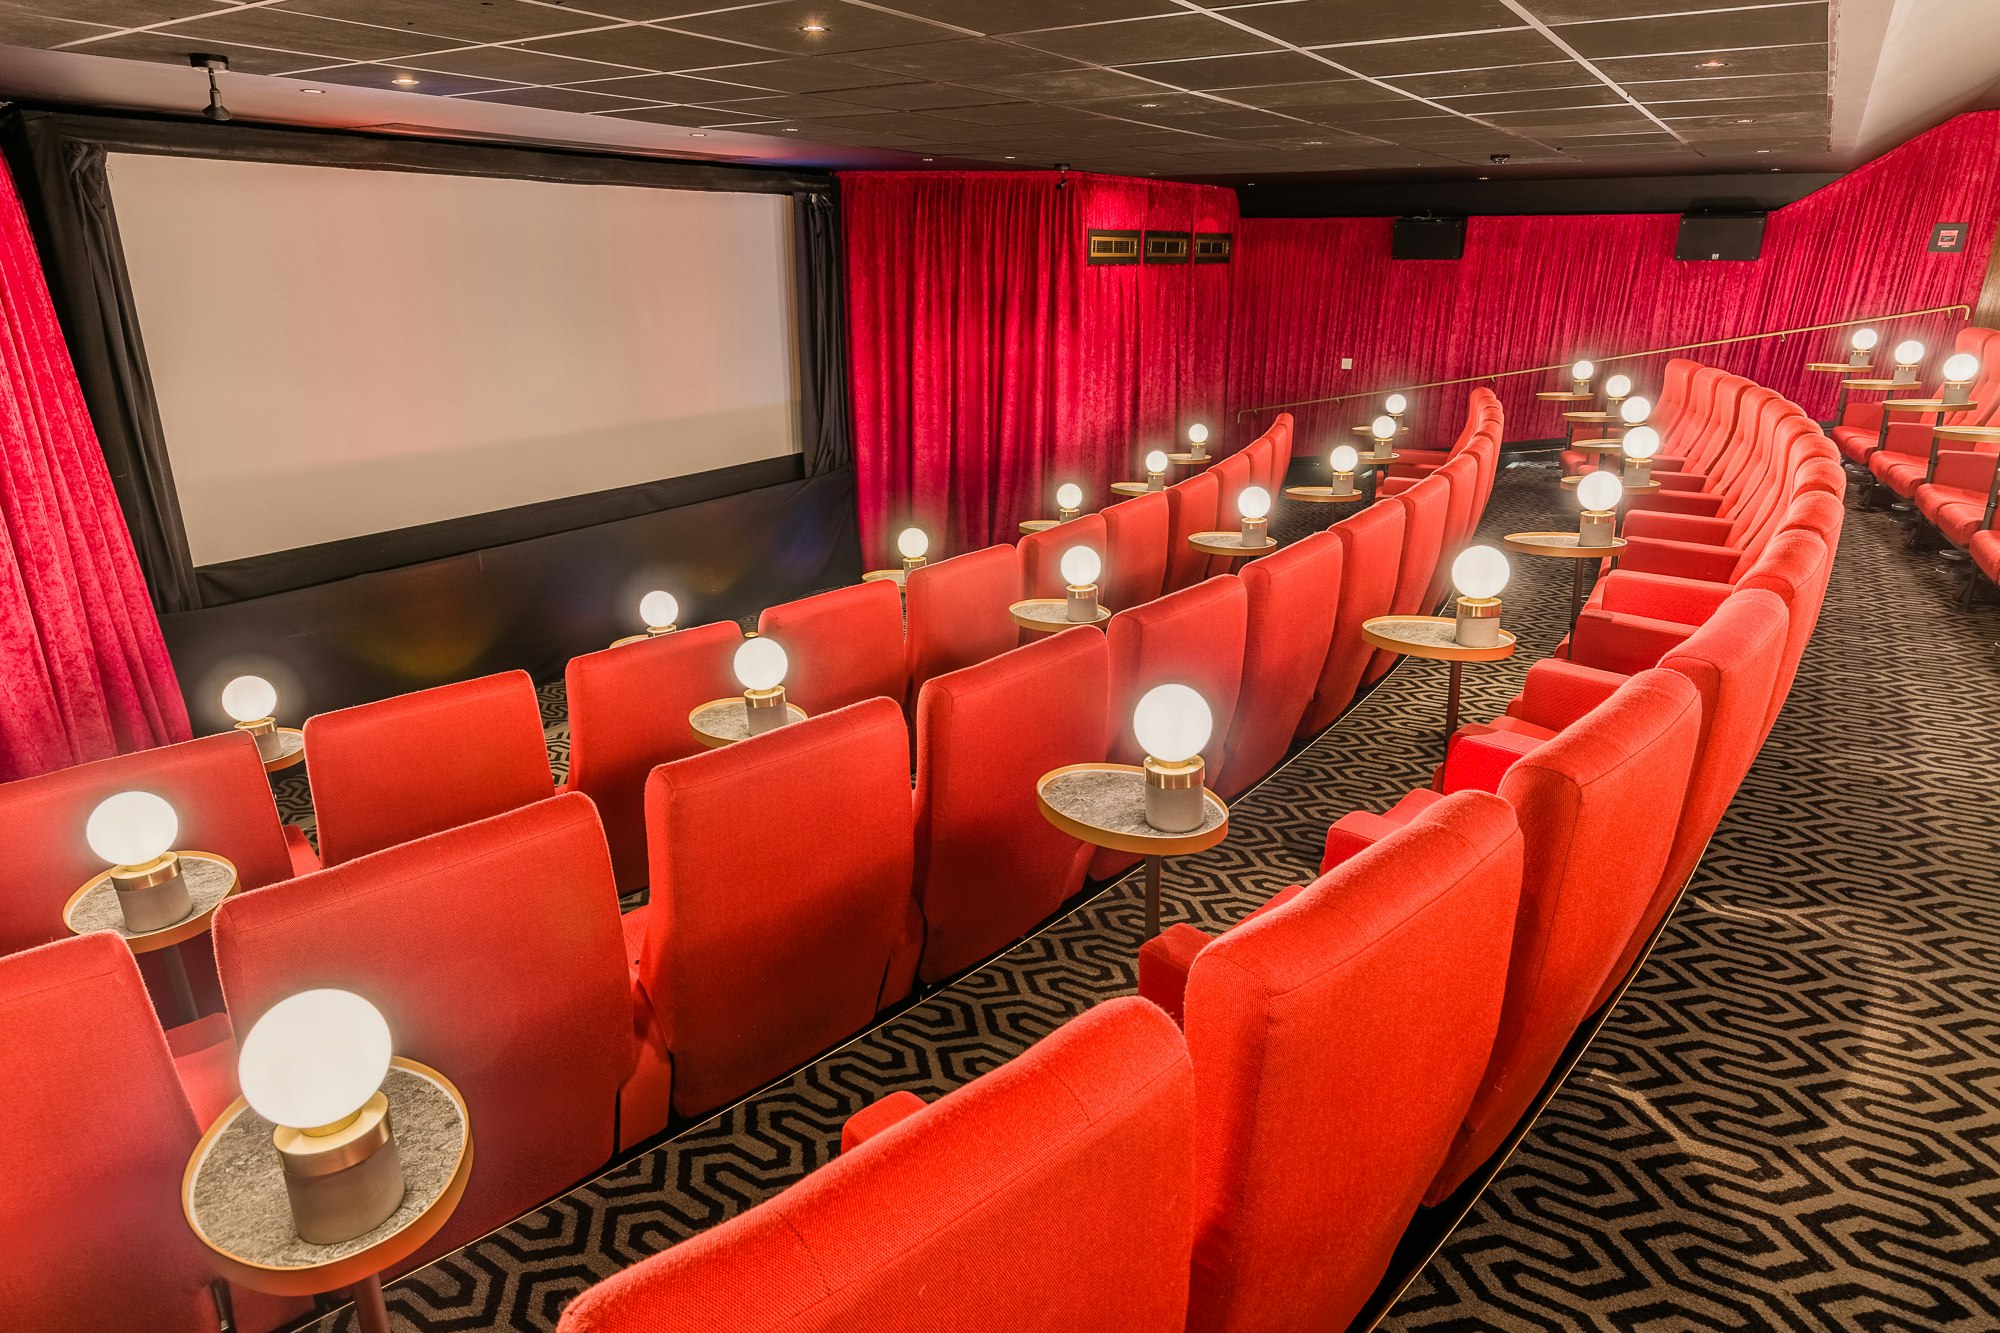 Curzon Mayfair - Screen Two image 4